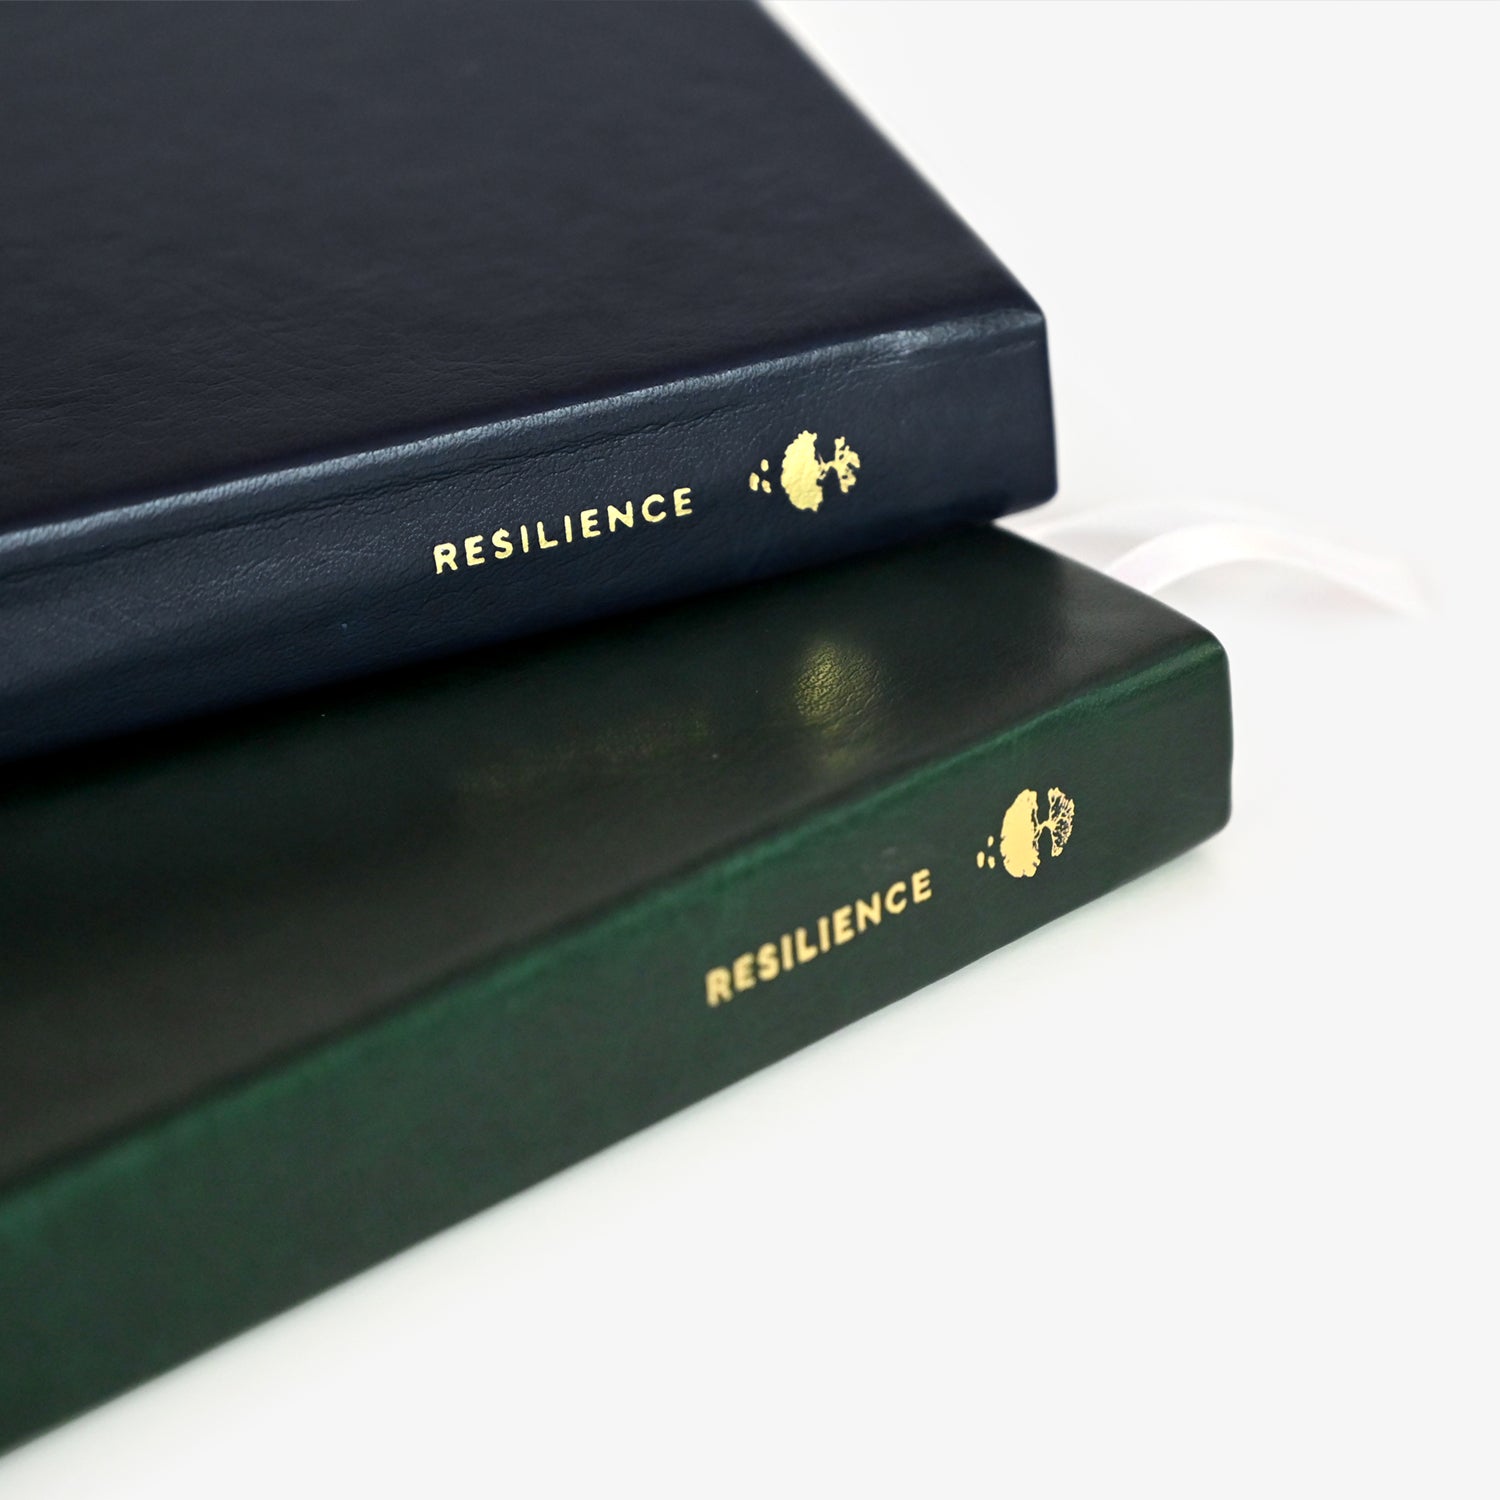 Resilience Journal - Product Image 011.jpg